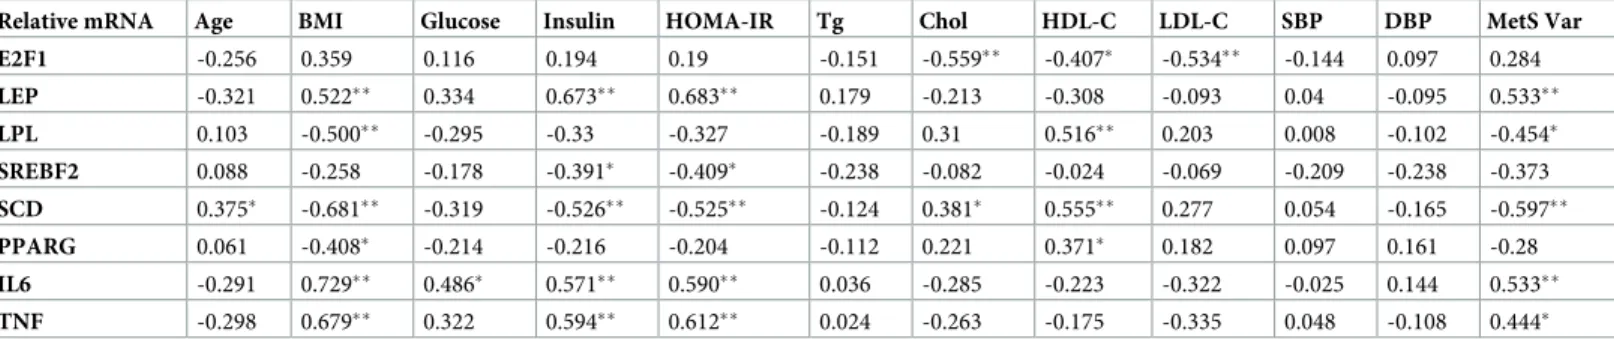 Table 3. Spearman correlation analysis between the relative mRNA levels at the study genes and the anthropometric and biochemical variables